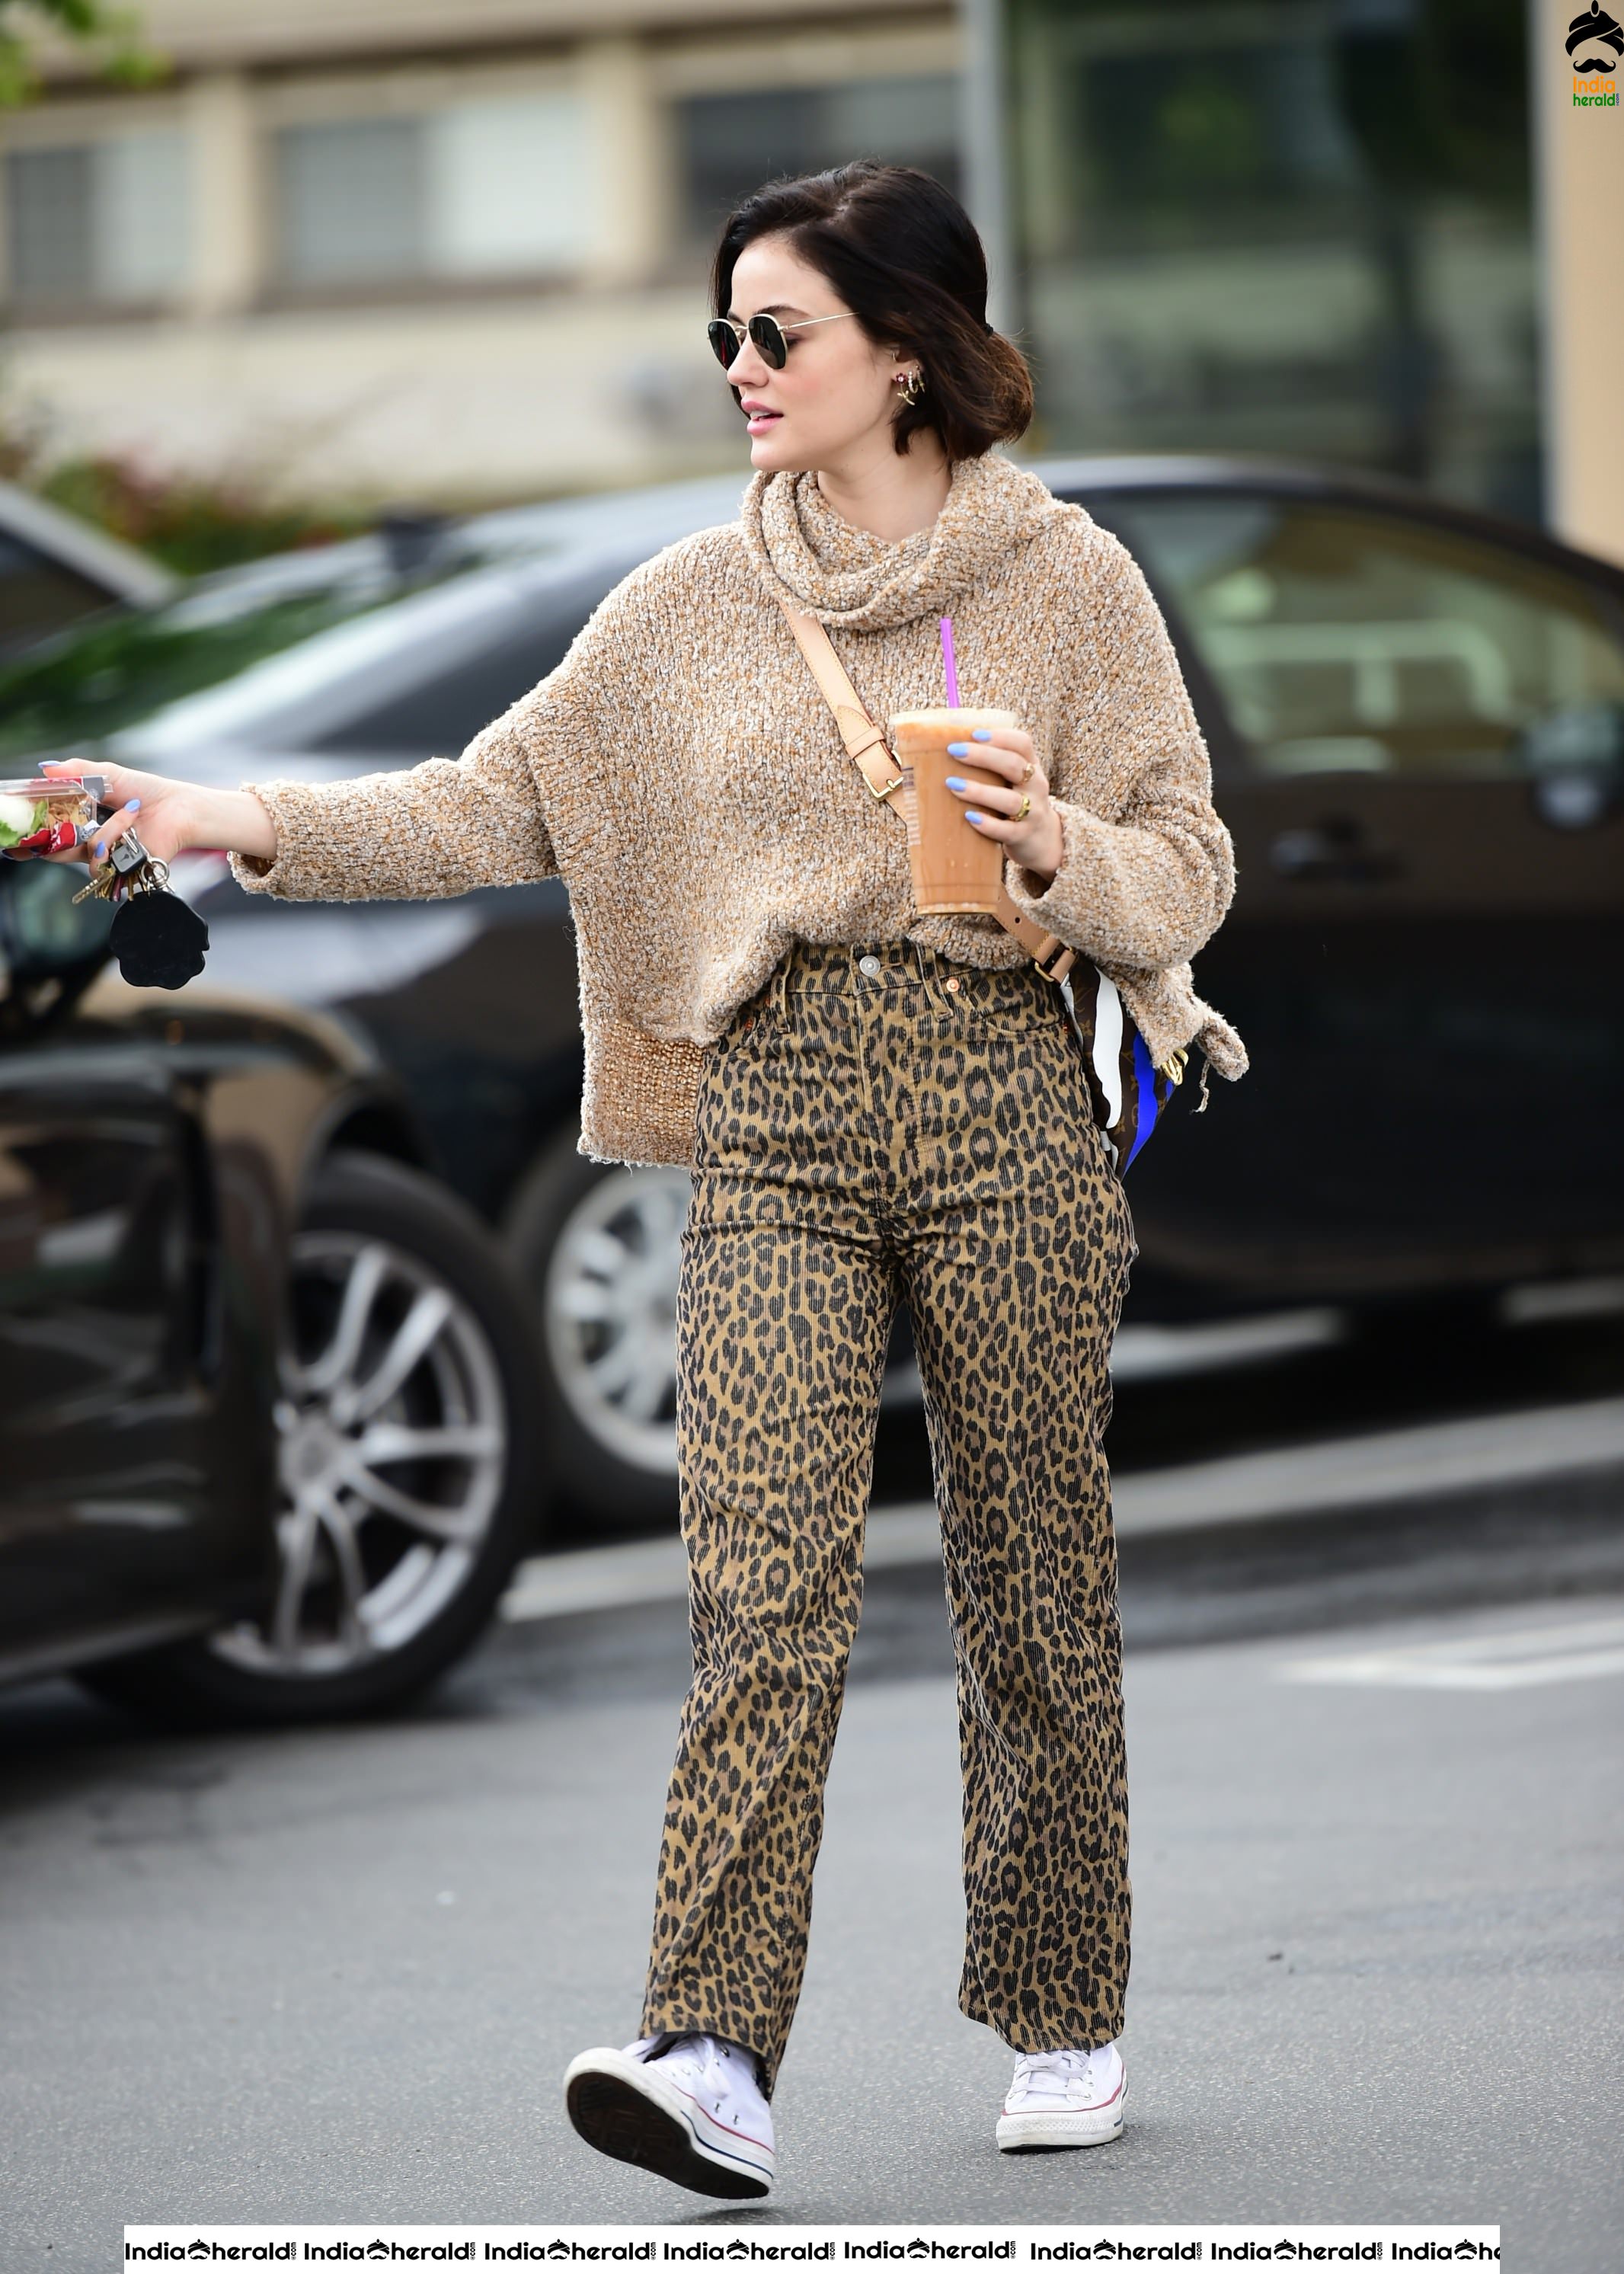 Gorgeous Paparazzi Photos of Lucy Hale while walking out in Los Angeles